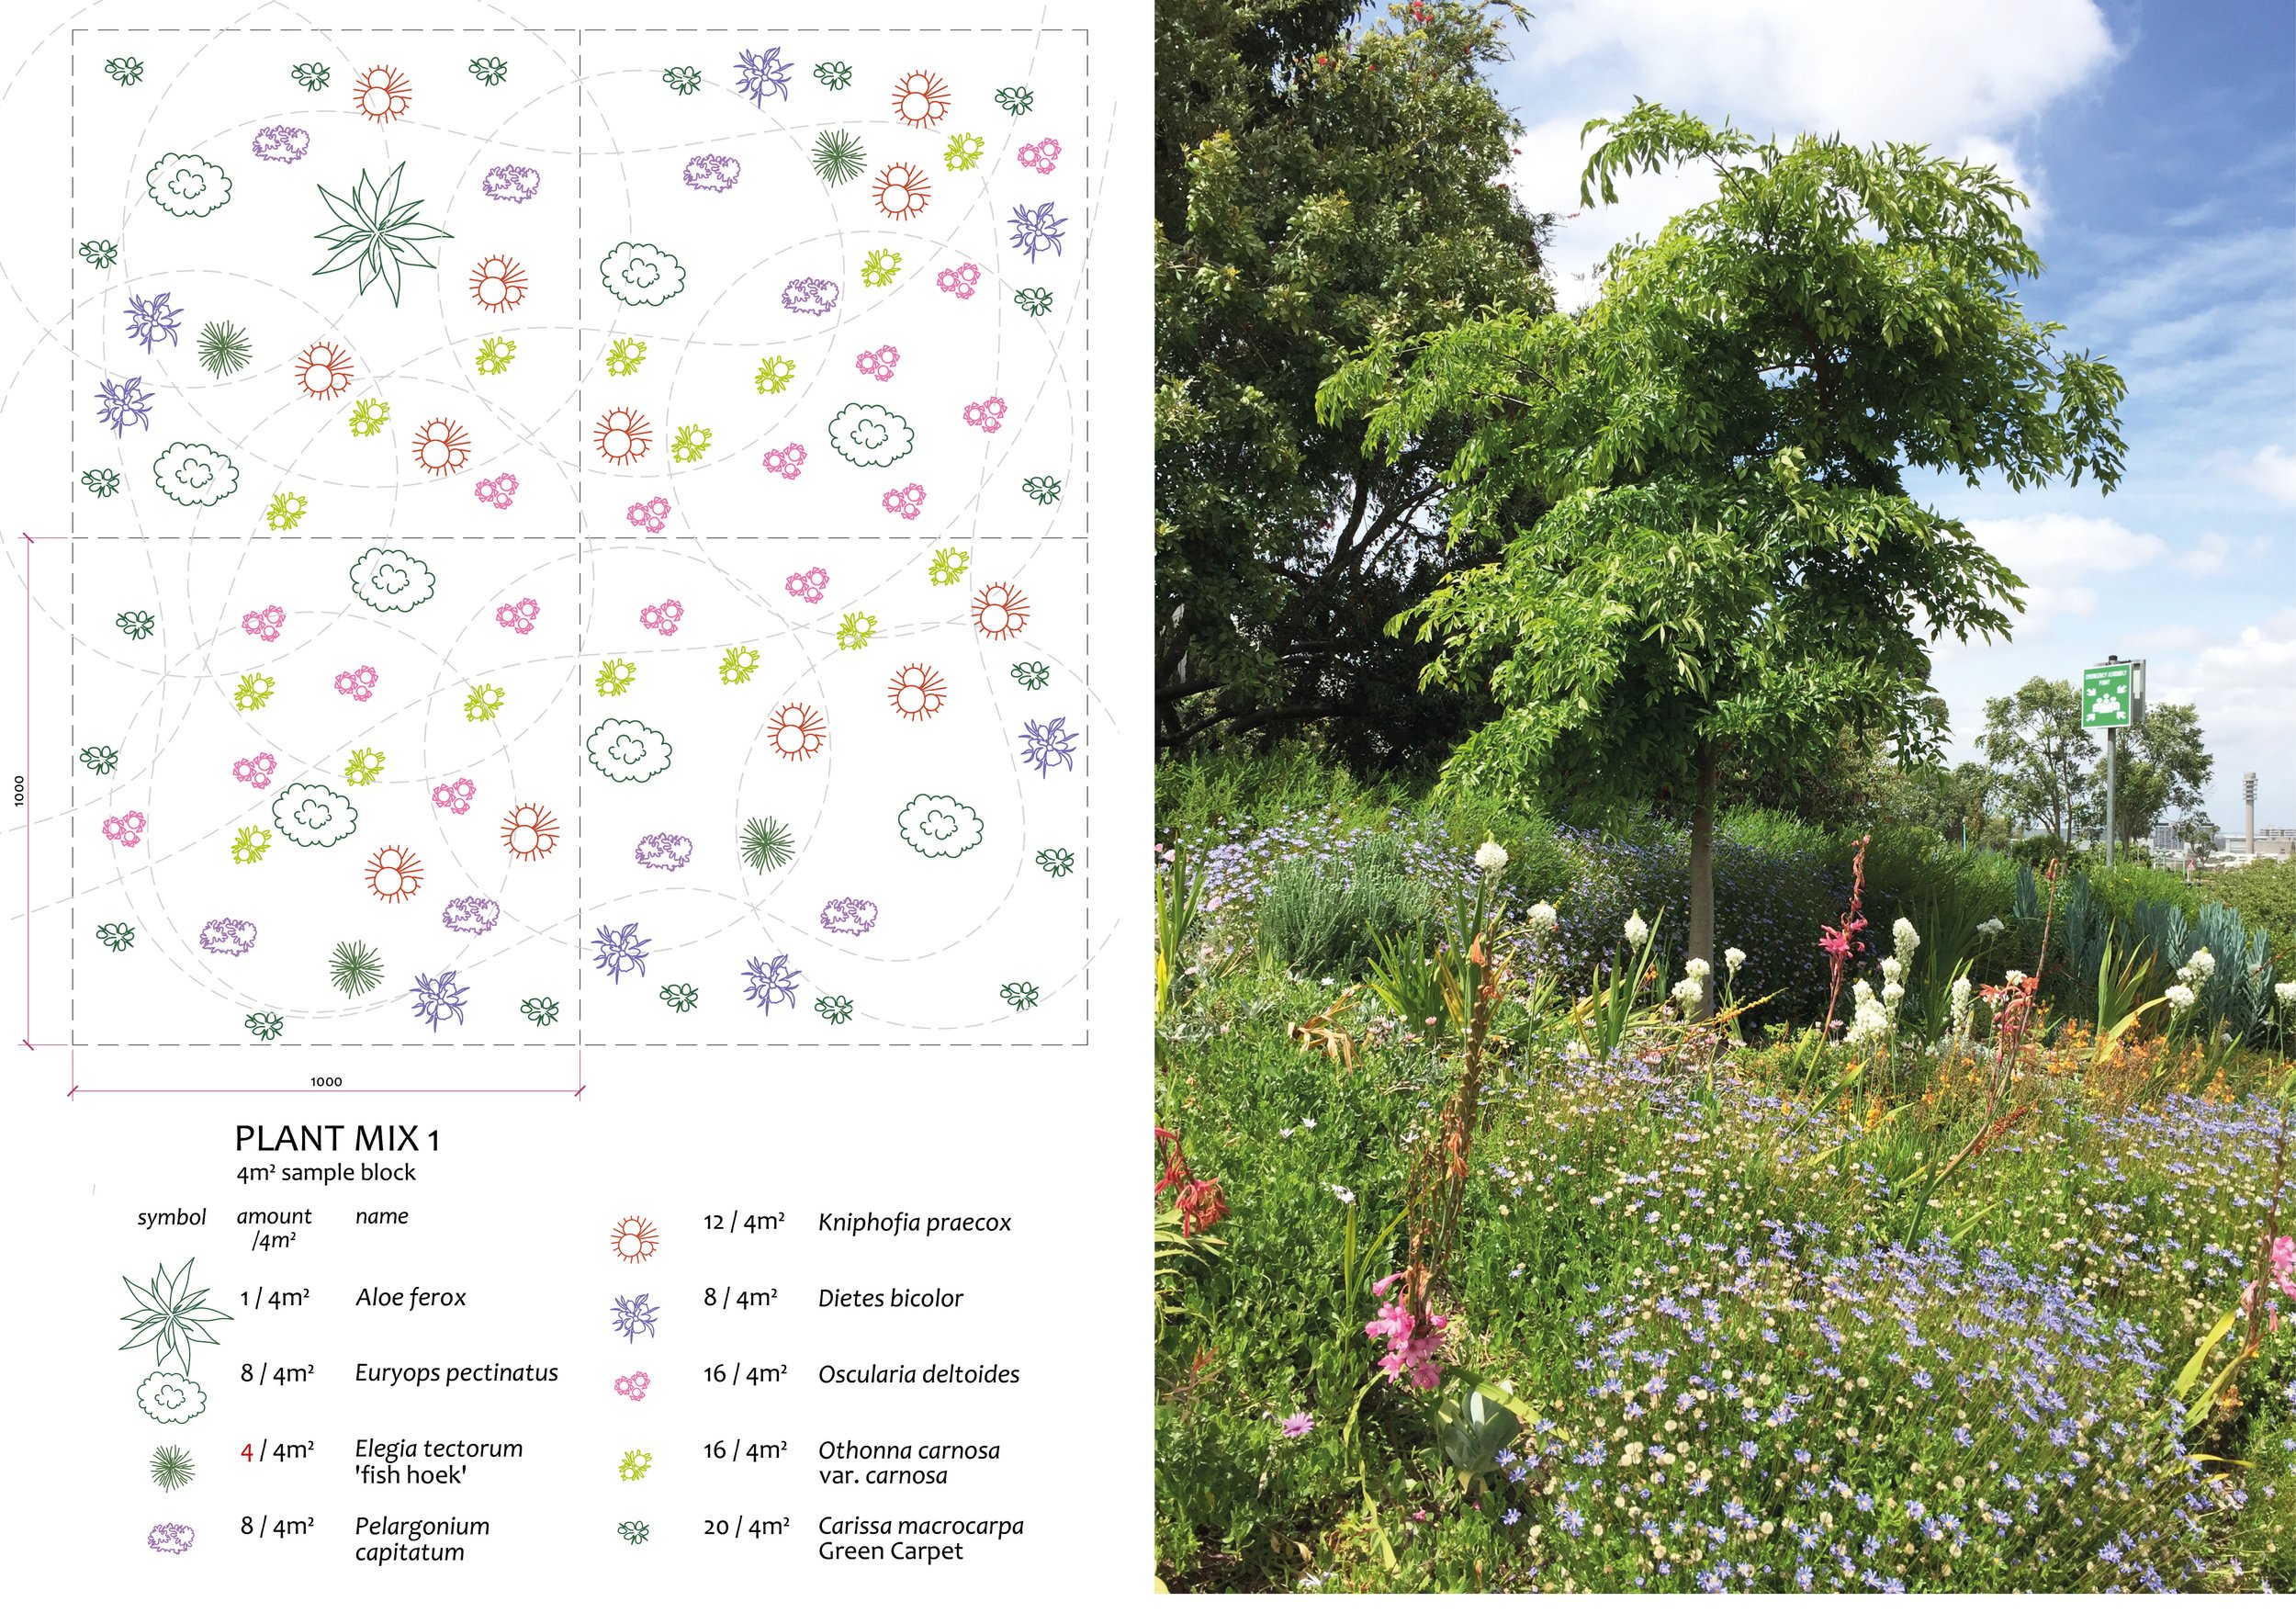  The planting palette was divided into twelve plant mixes, each containing a varied mixture of plant species spread across the park to achieve a colourful and diverse pattern of colour. 